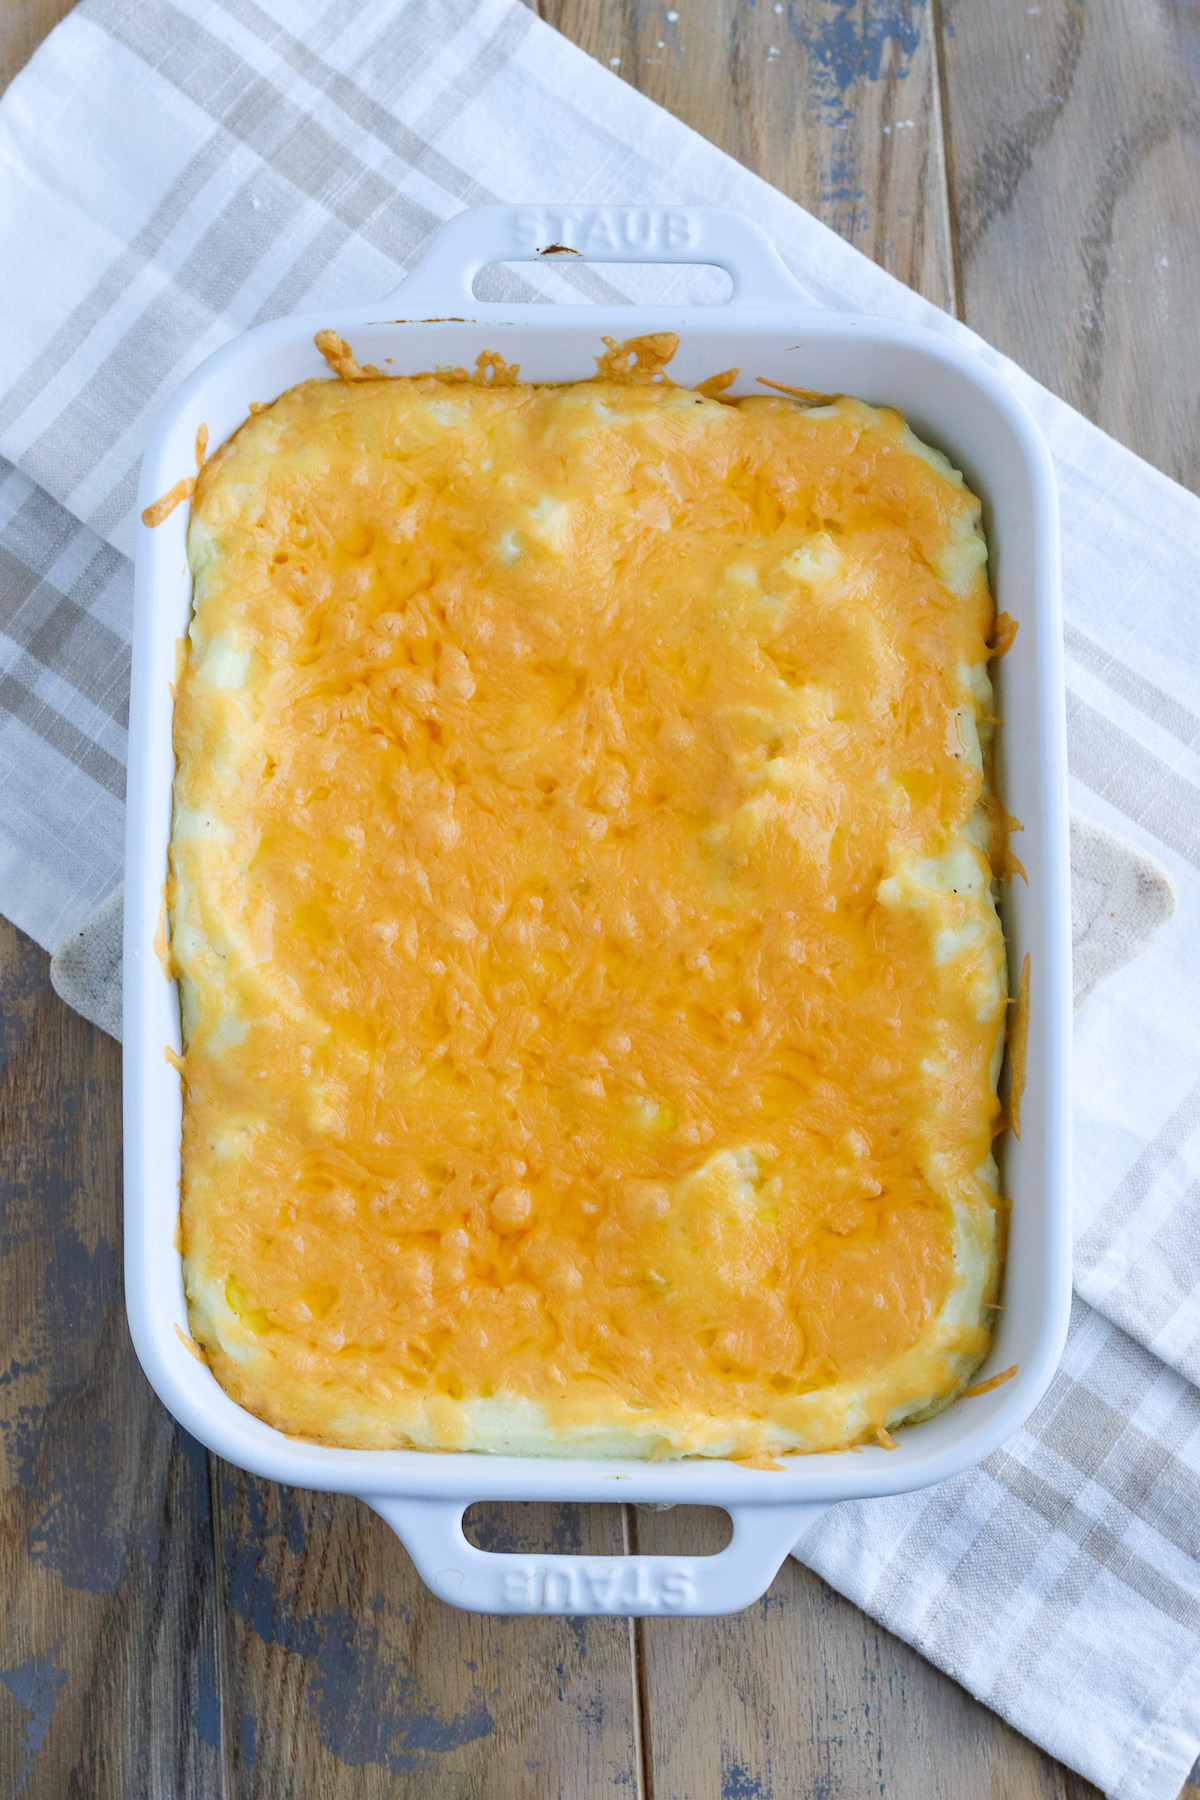 mashed potato casserole just out of the oven